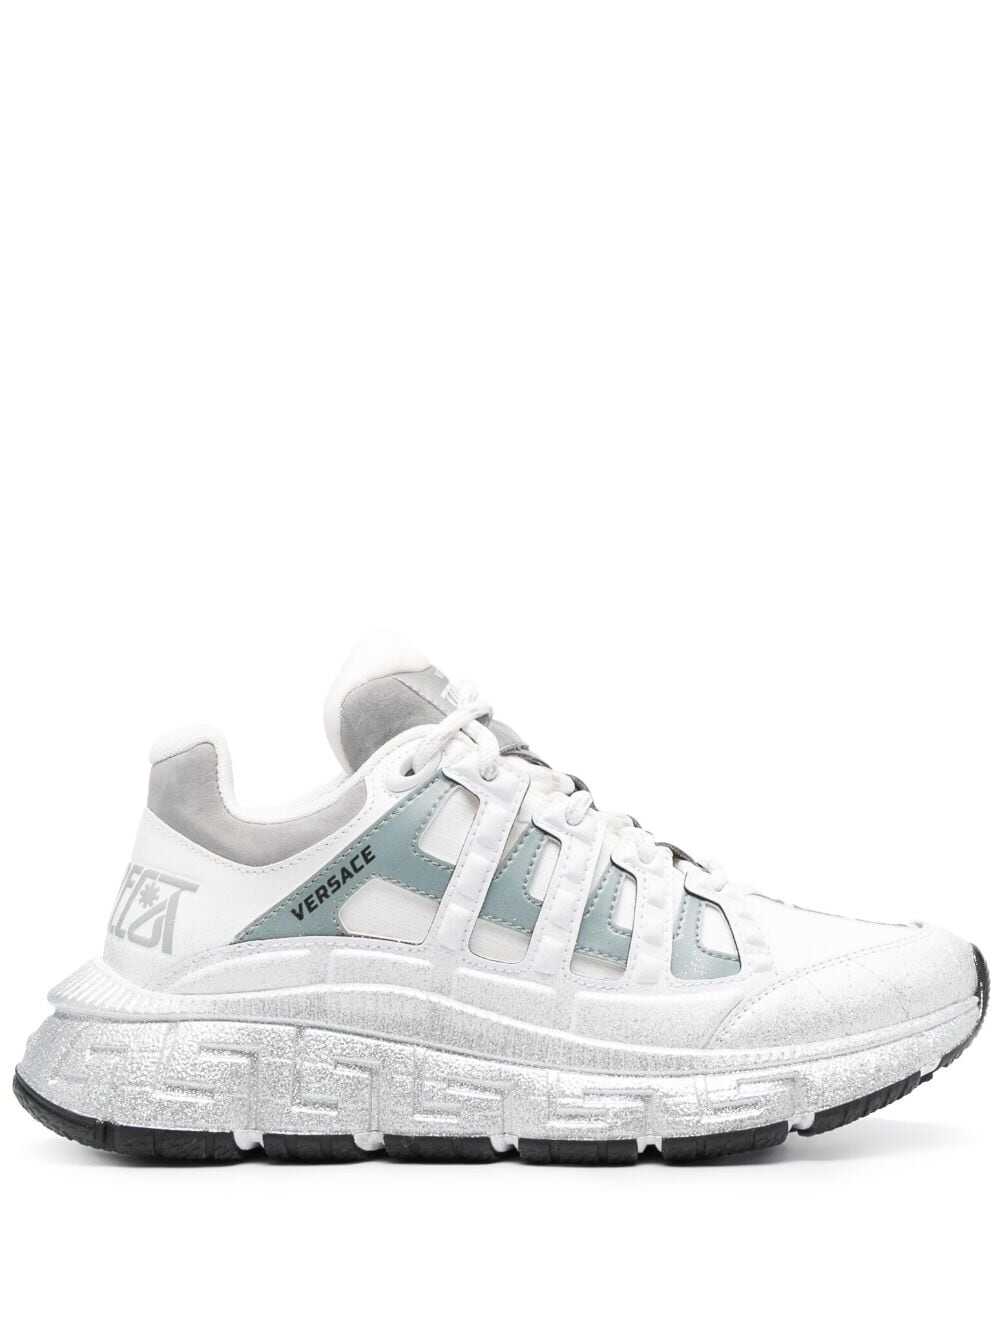 Versace Sneakers White White image5